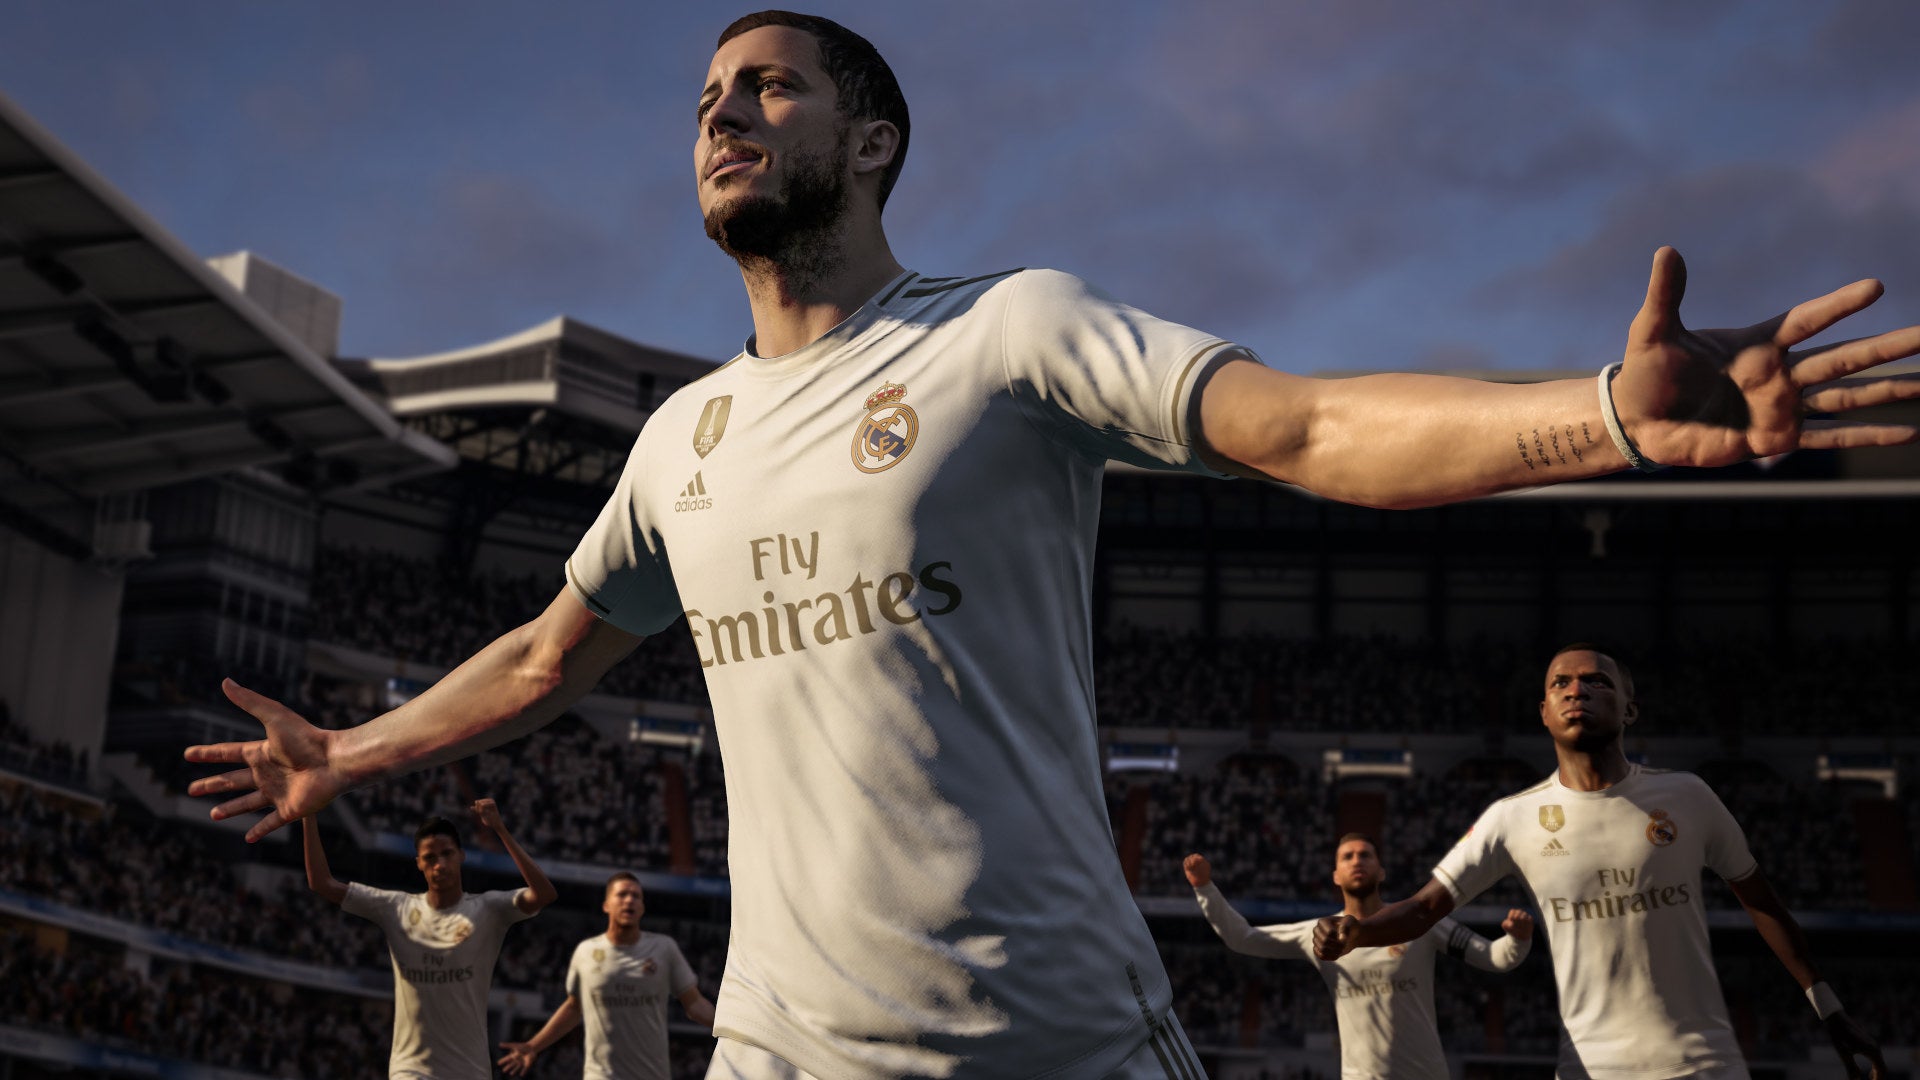 Image for English Premier League players are competing in a Fifa 20 tournament this week